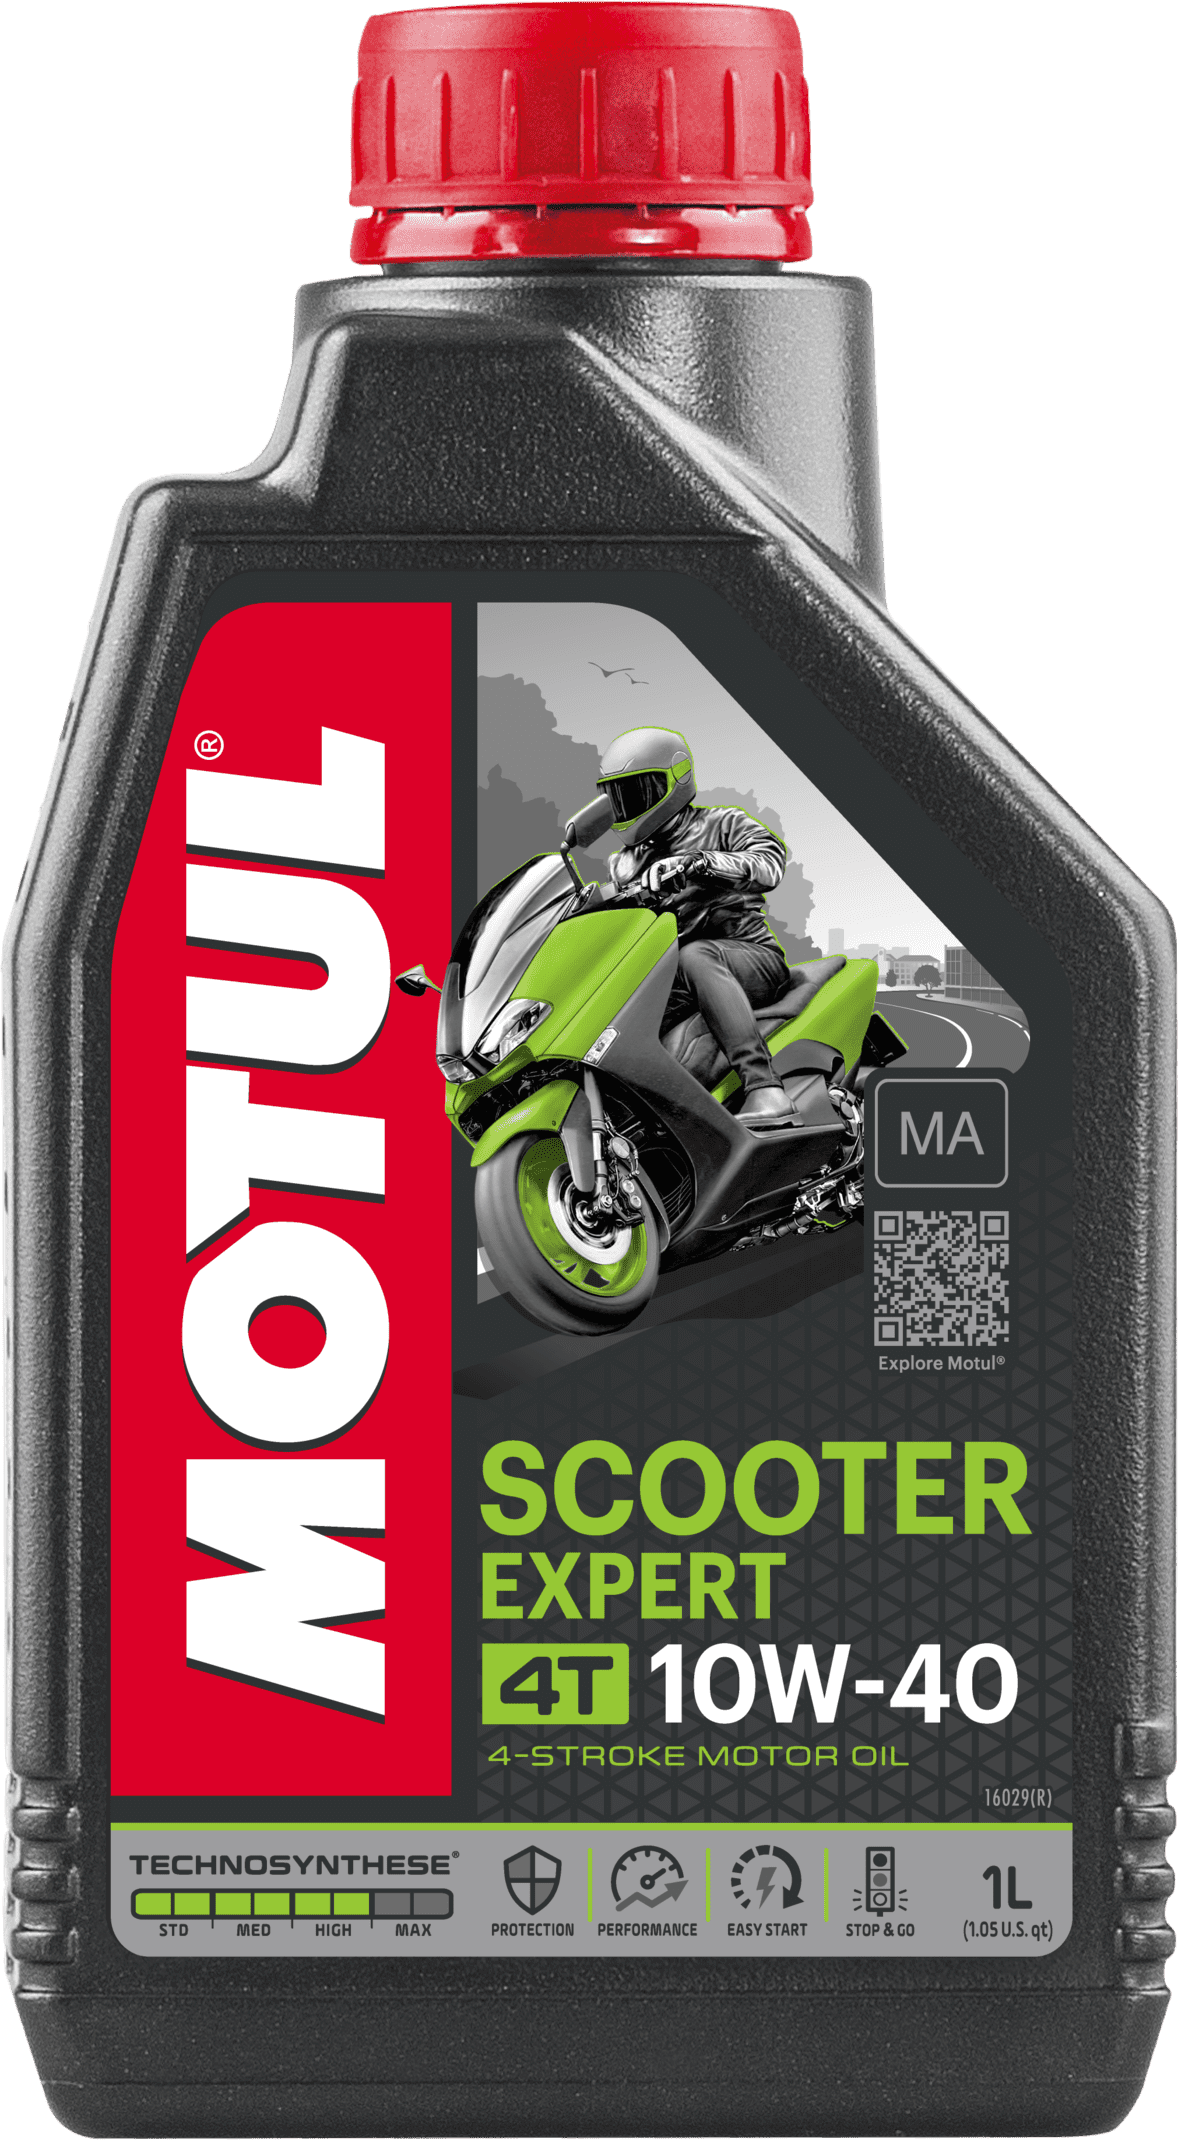 105960-1 Synthetic Technosynthese® lubricant designed for 4-Stroke scooter engines.